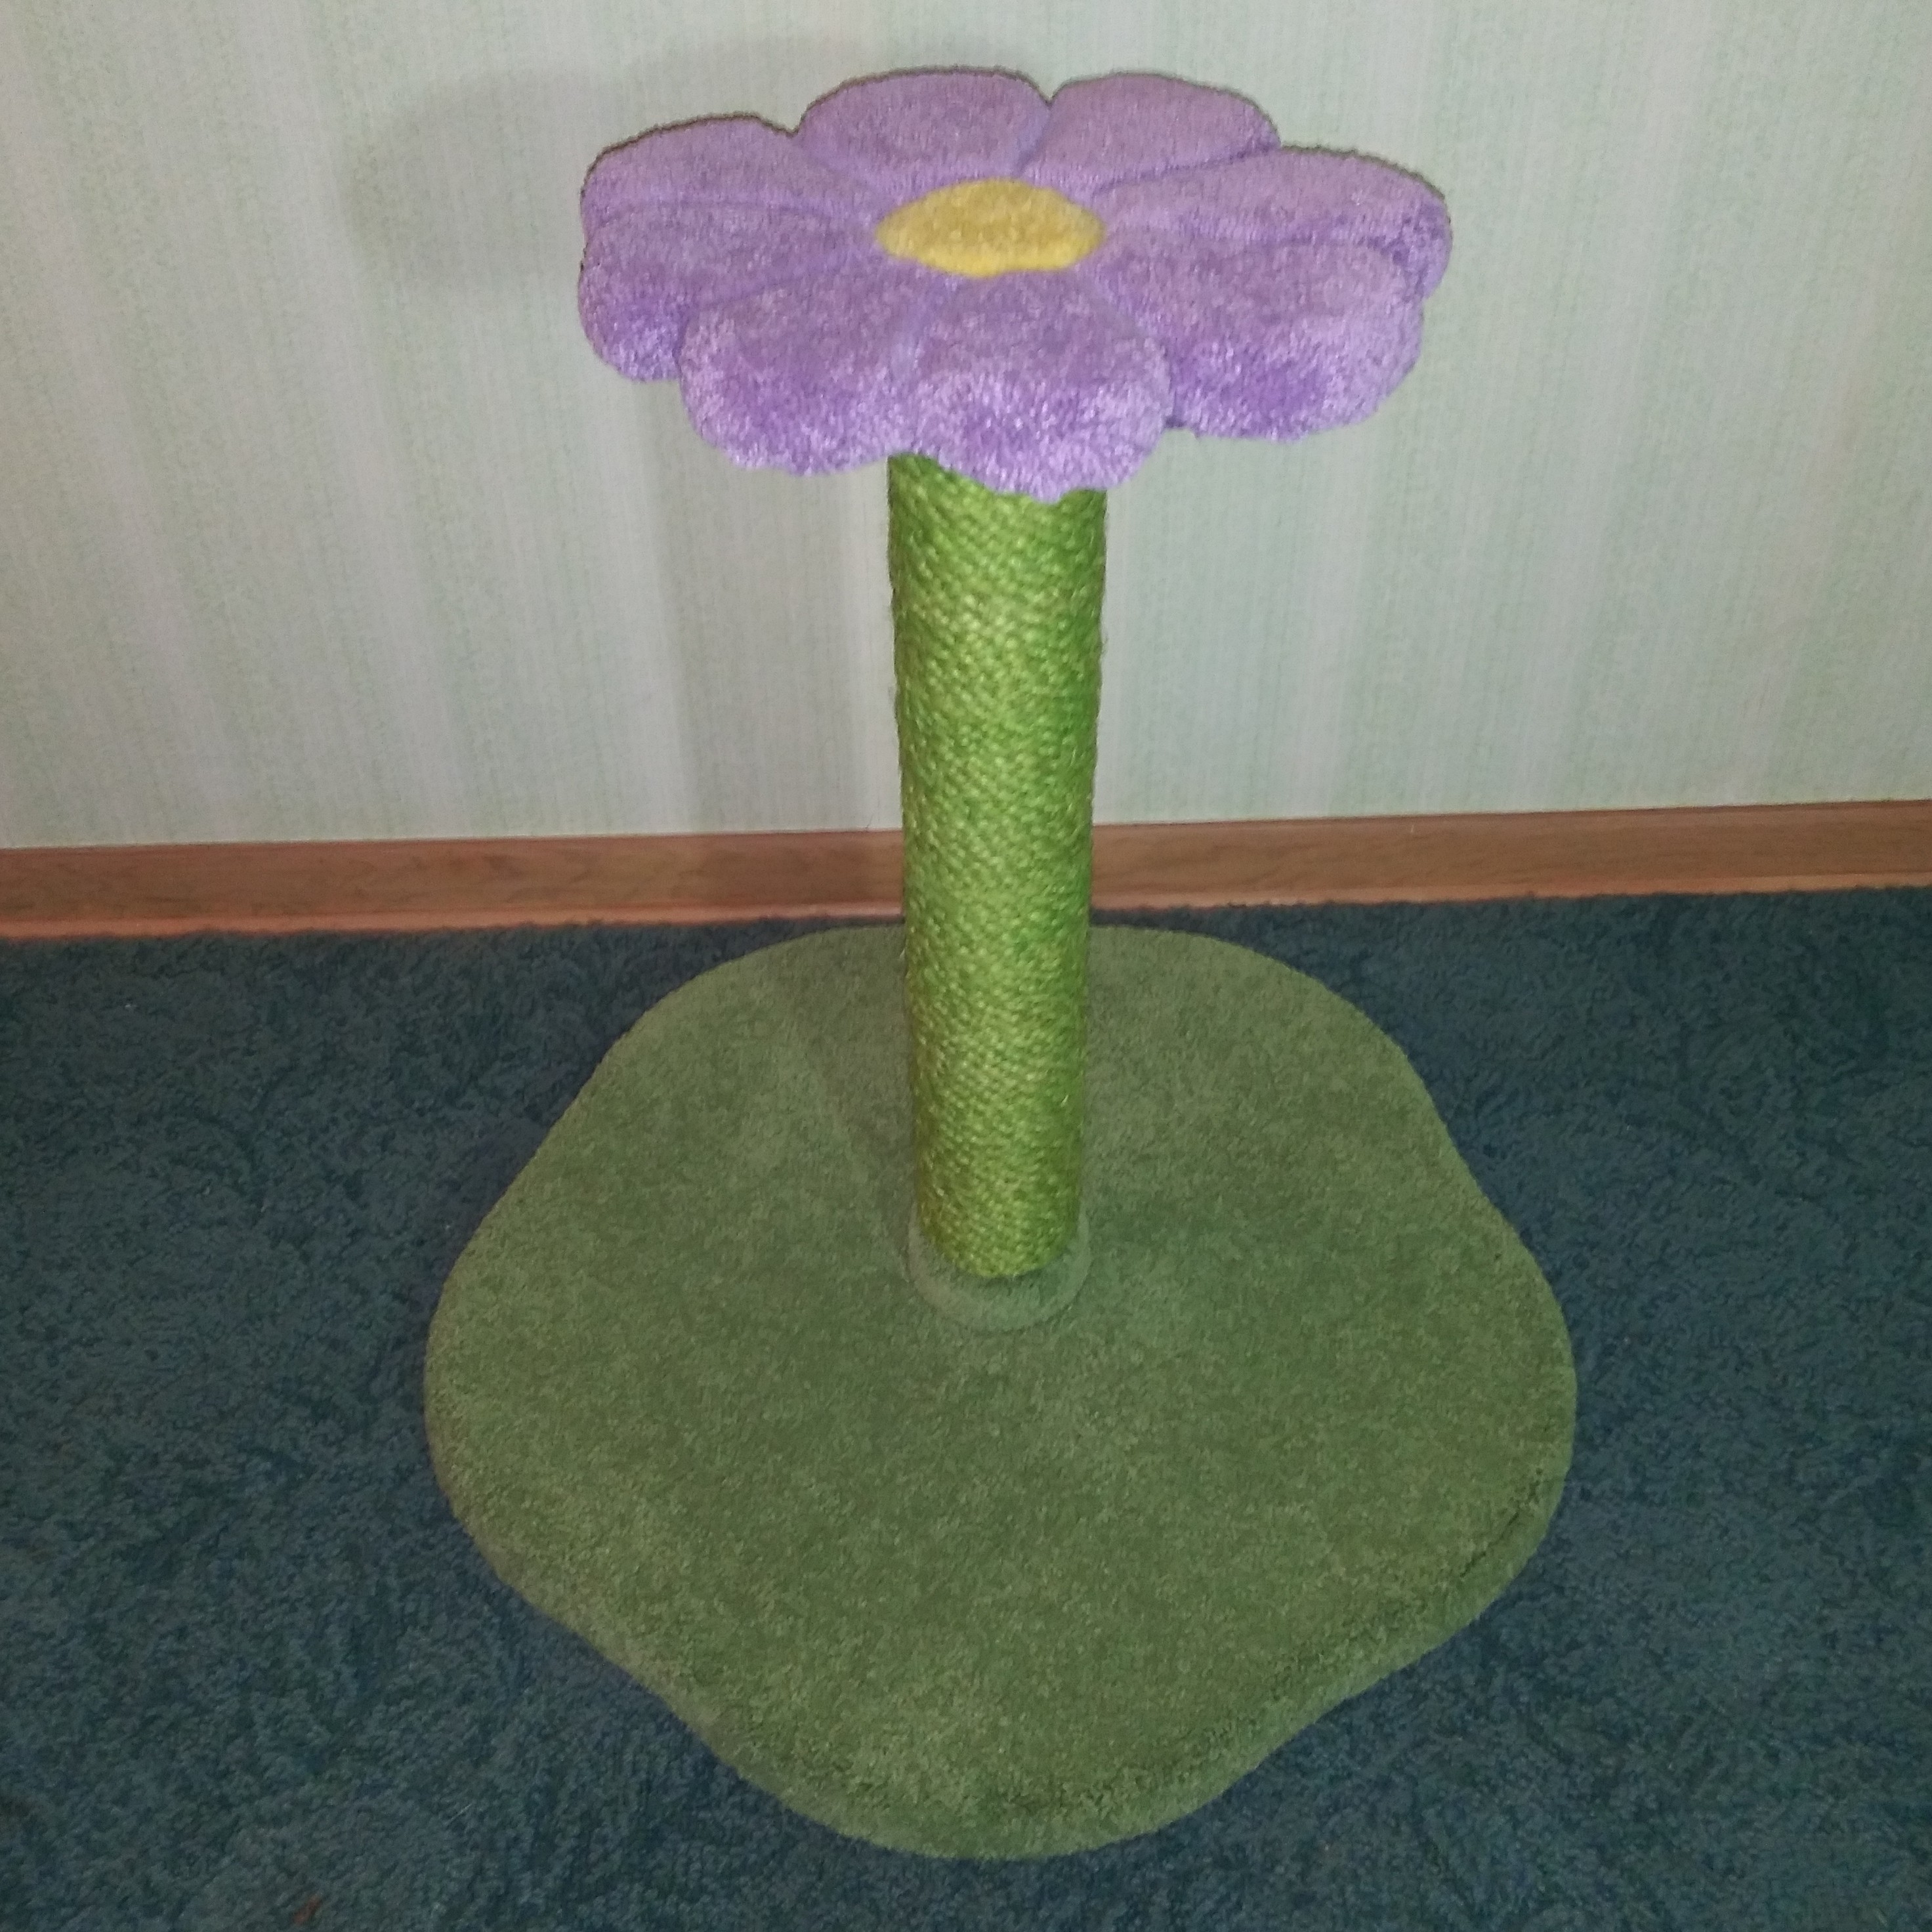 26" with lavender daisy, grass green base, and grass green sisal